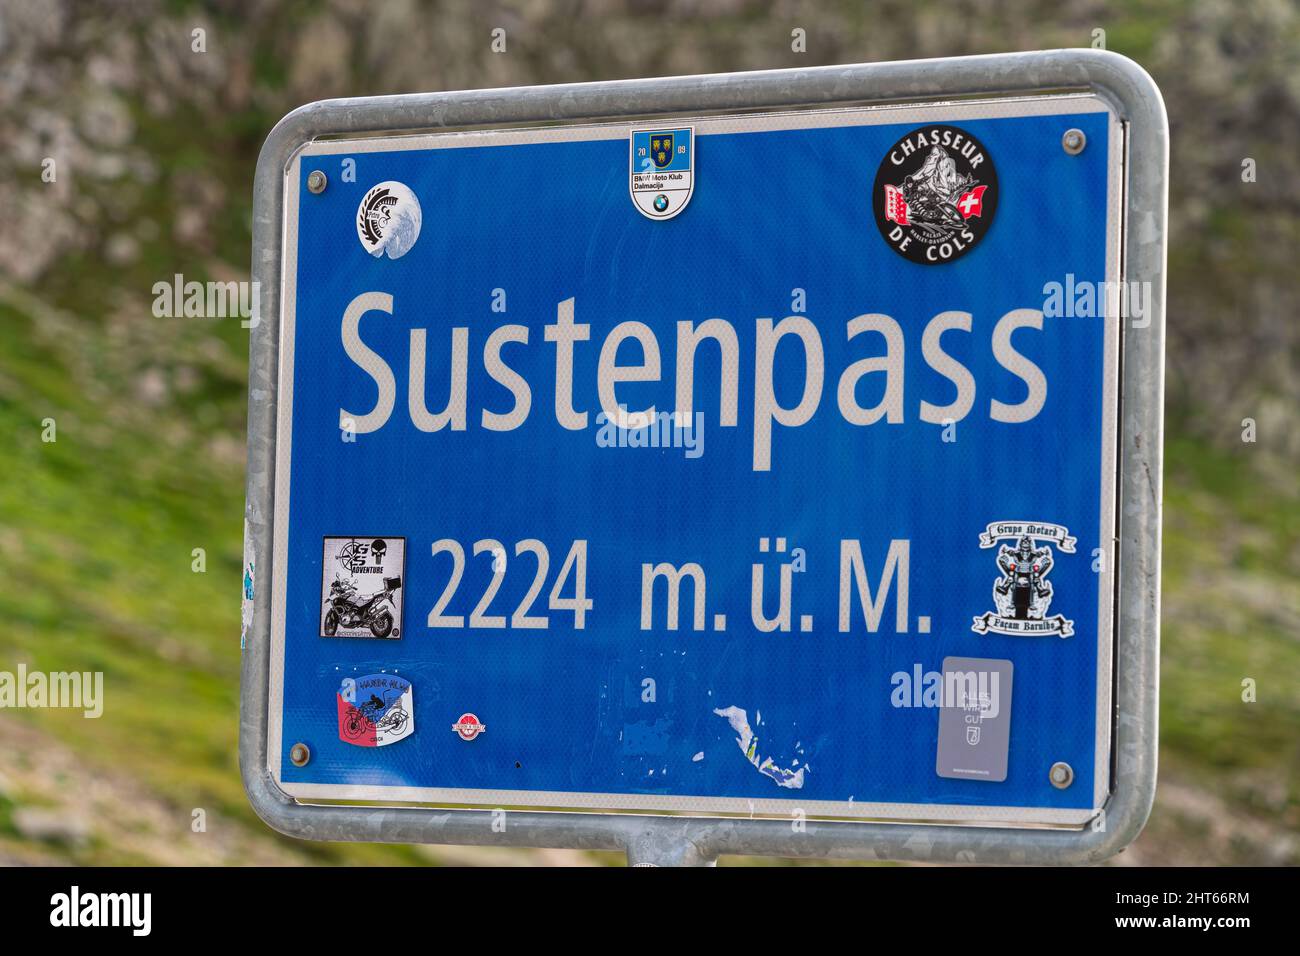 Sustenpass, Switzerland - August 13, 2021: Sustenpass is the swiss mountain pass connecting cantons of Bern and Uri at 2224 metres above sea level. Stock Photo